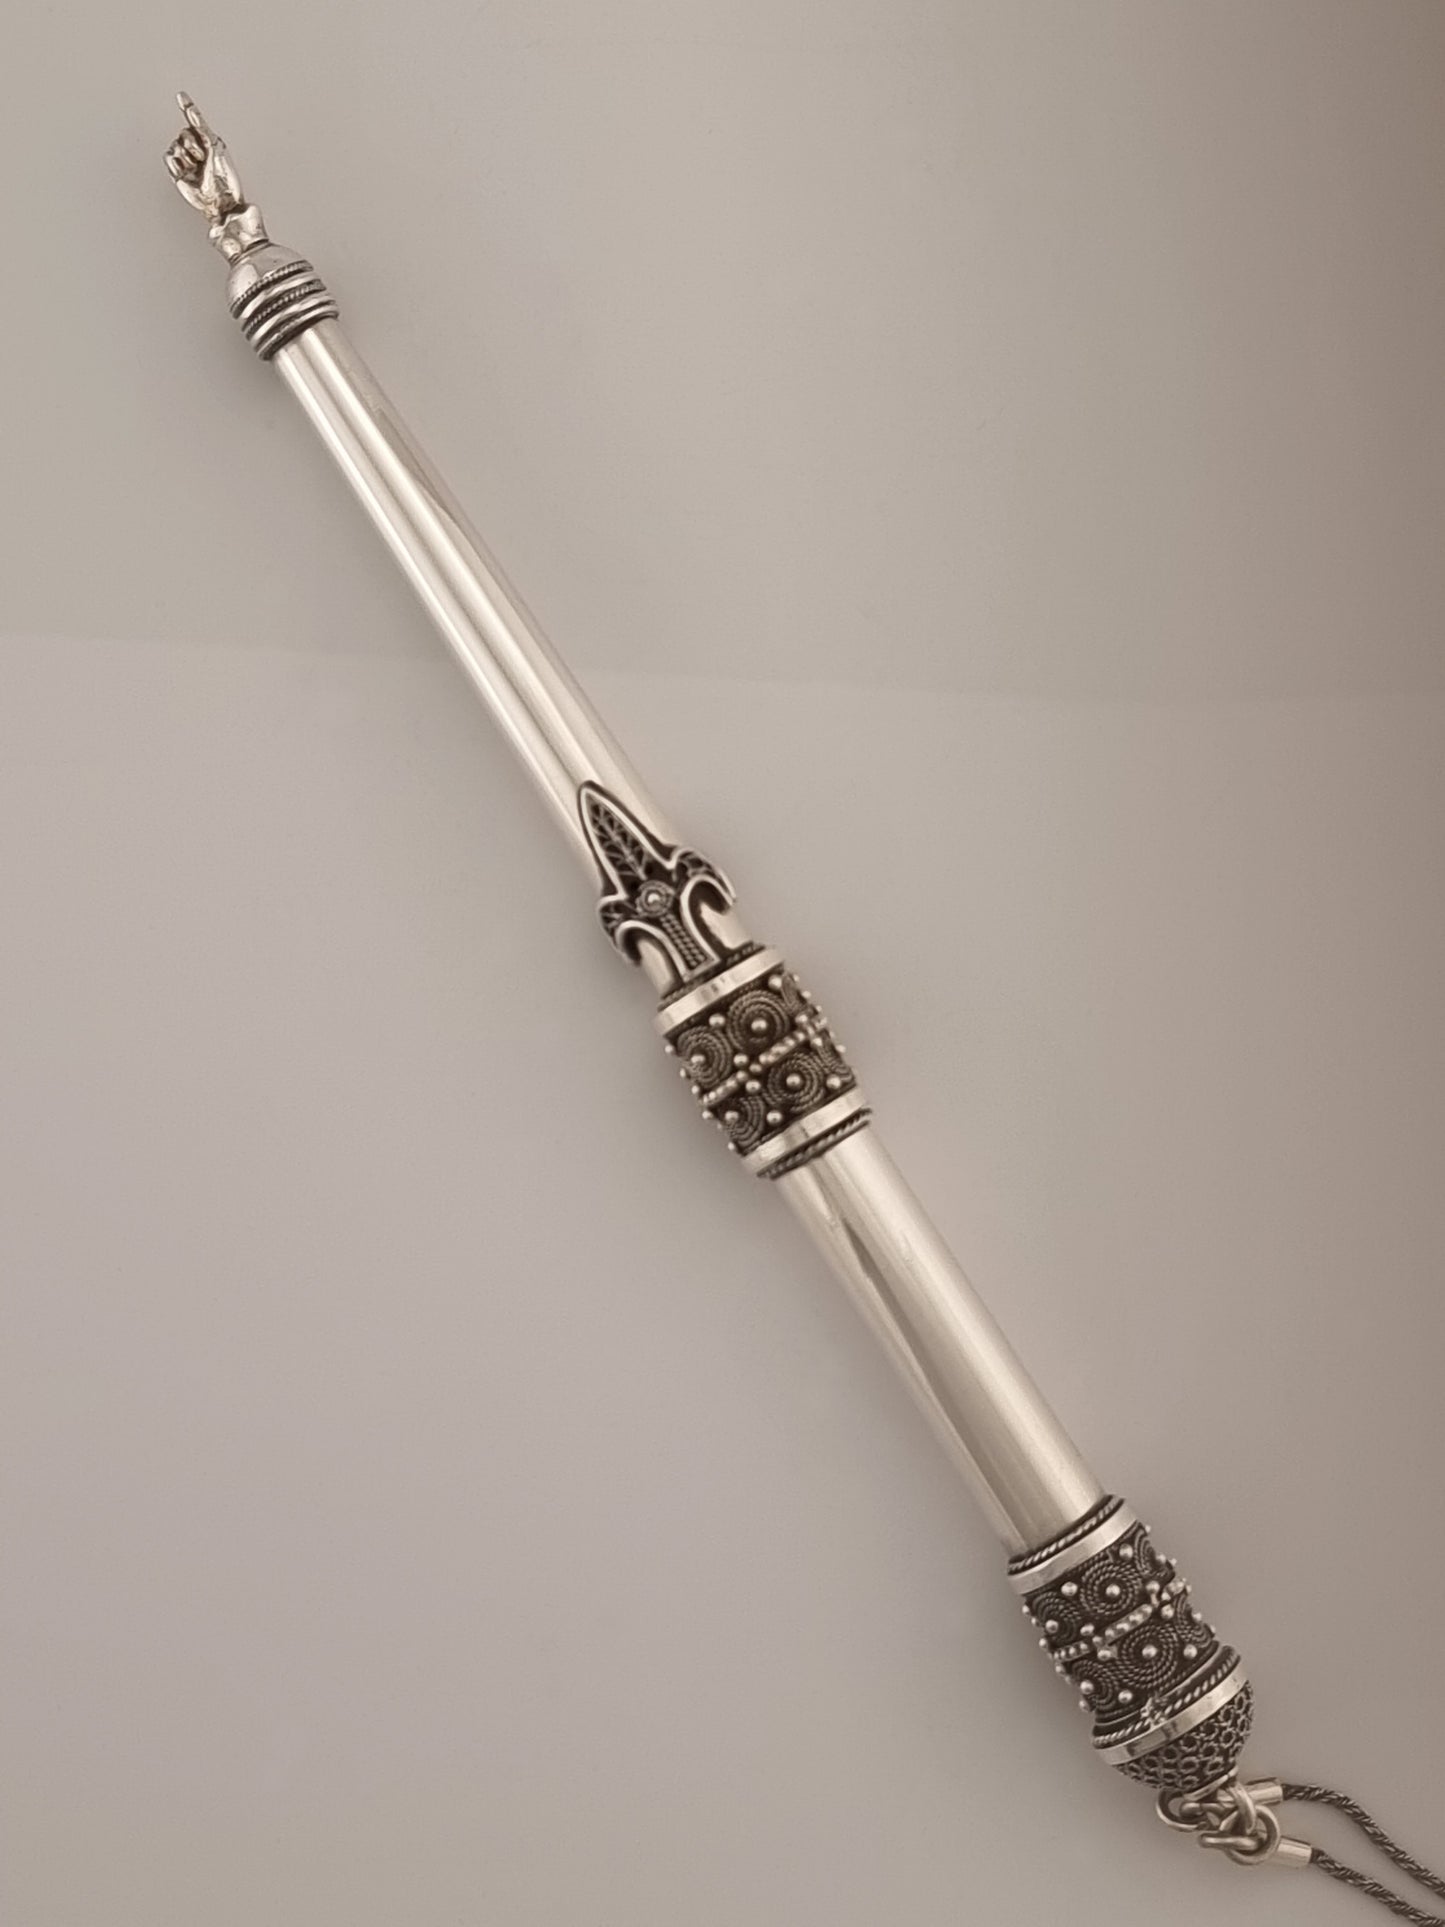 8" Torah pointer made of 925 sterling silver